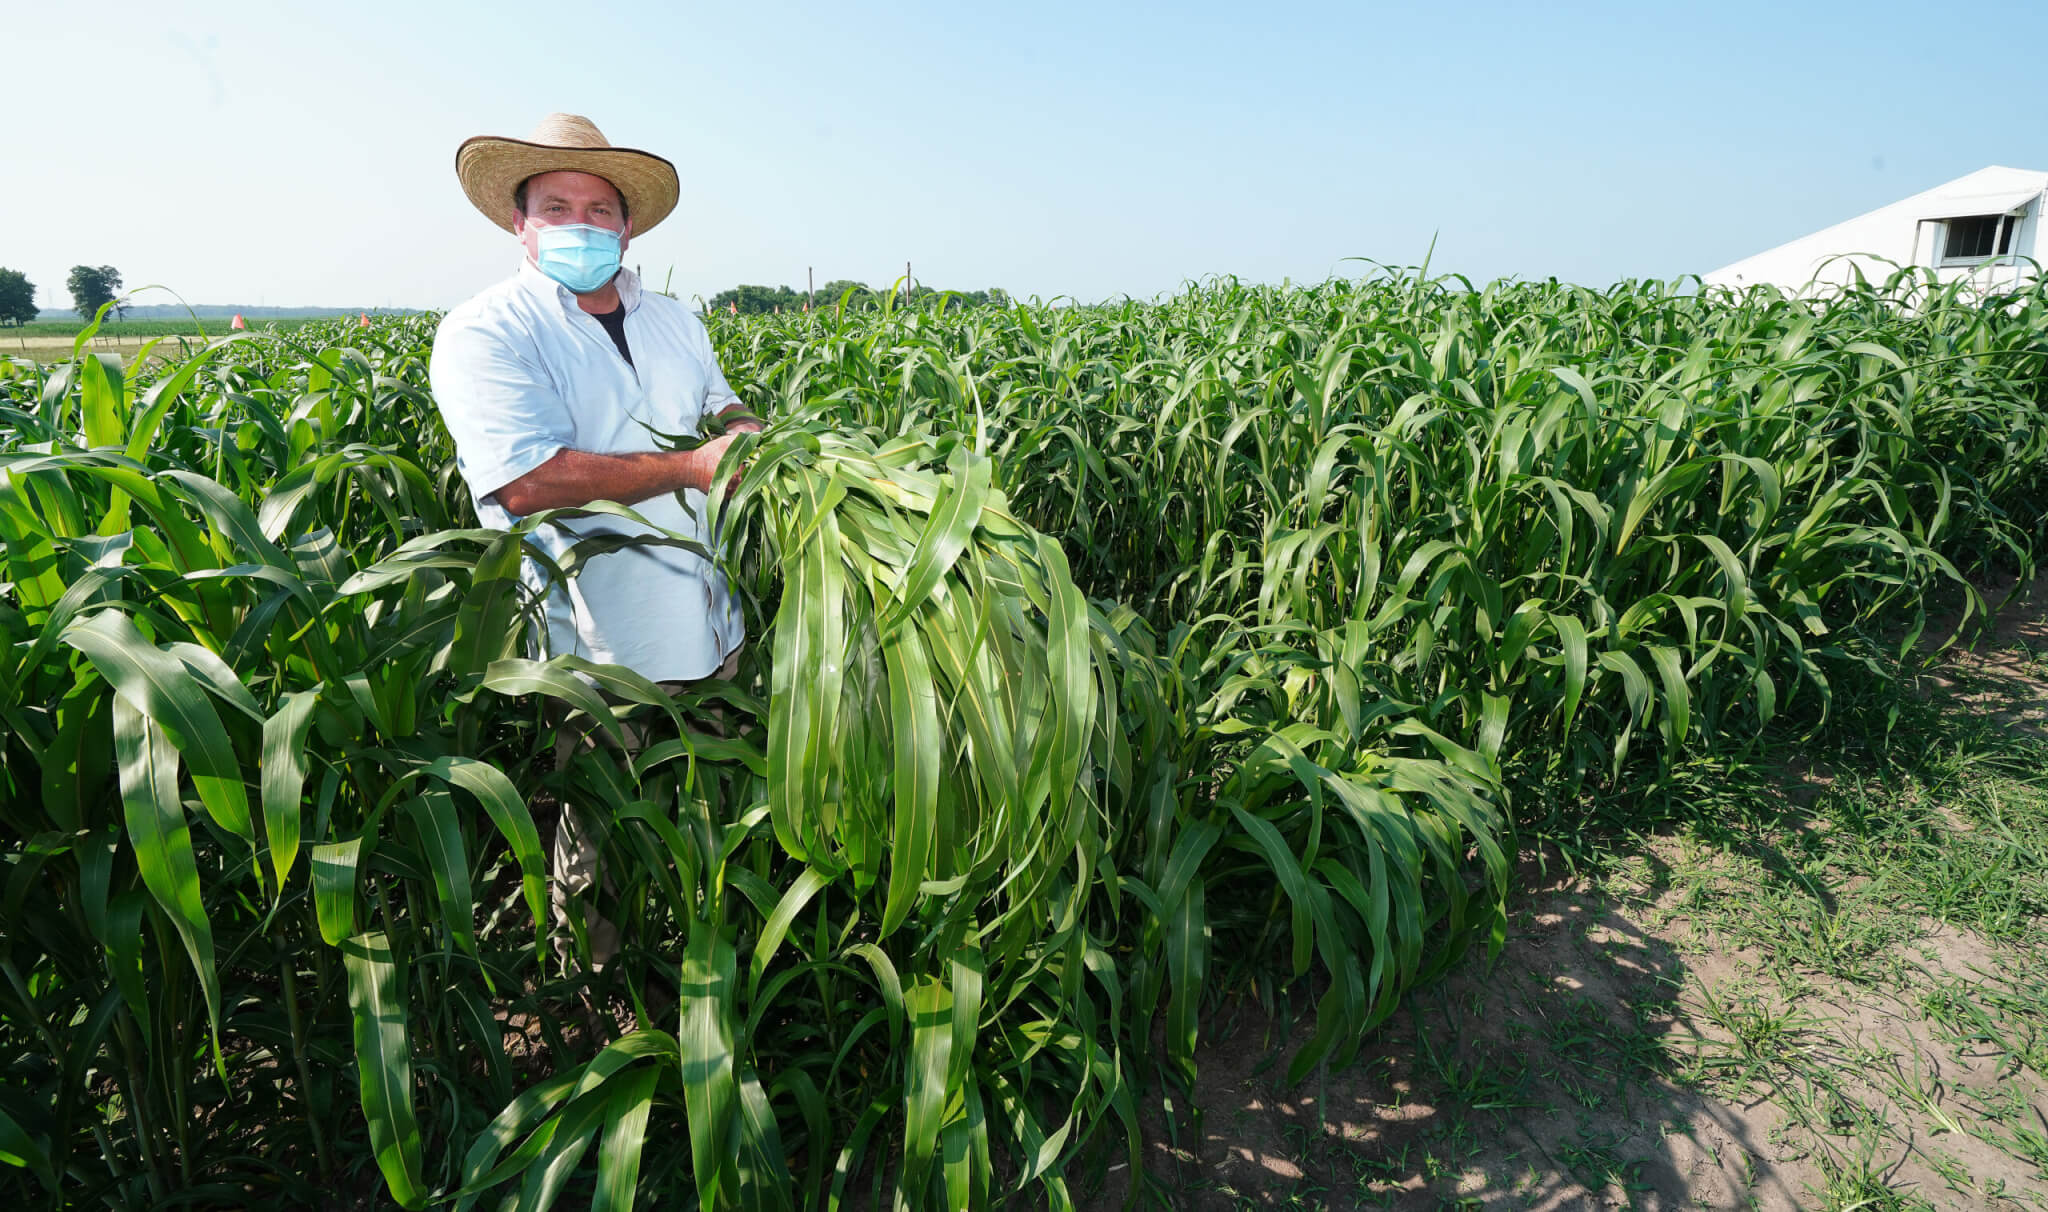 Mitch Tuinstra, a professor of plant breeding and genetics collecting samples in a sorghum plantation